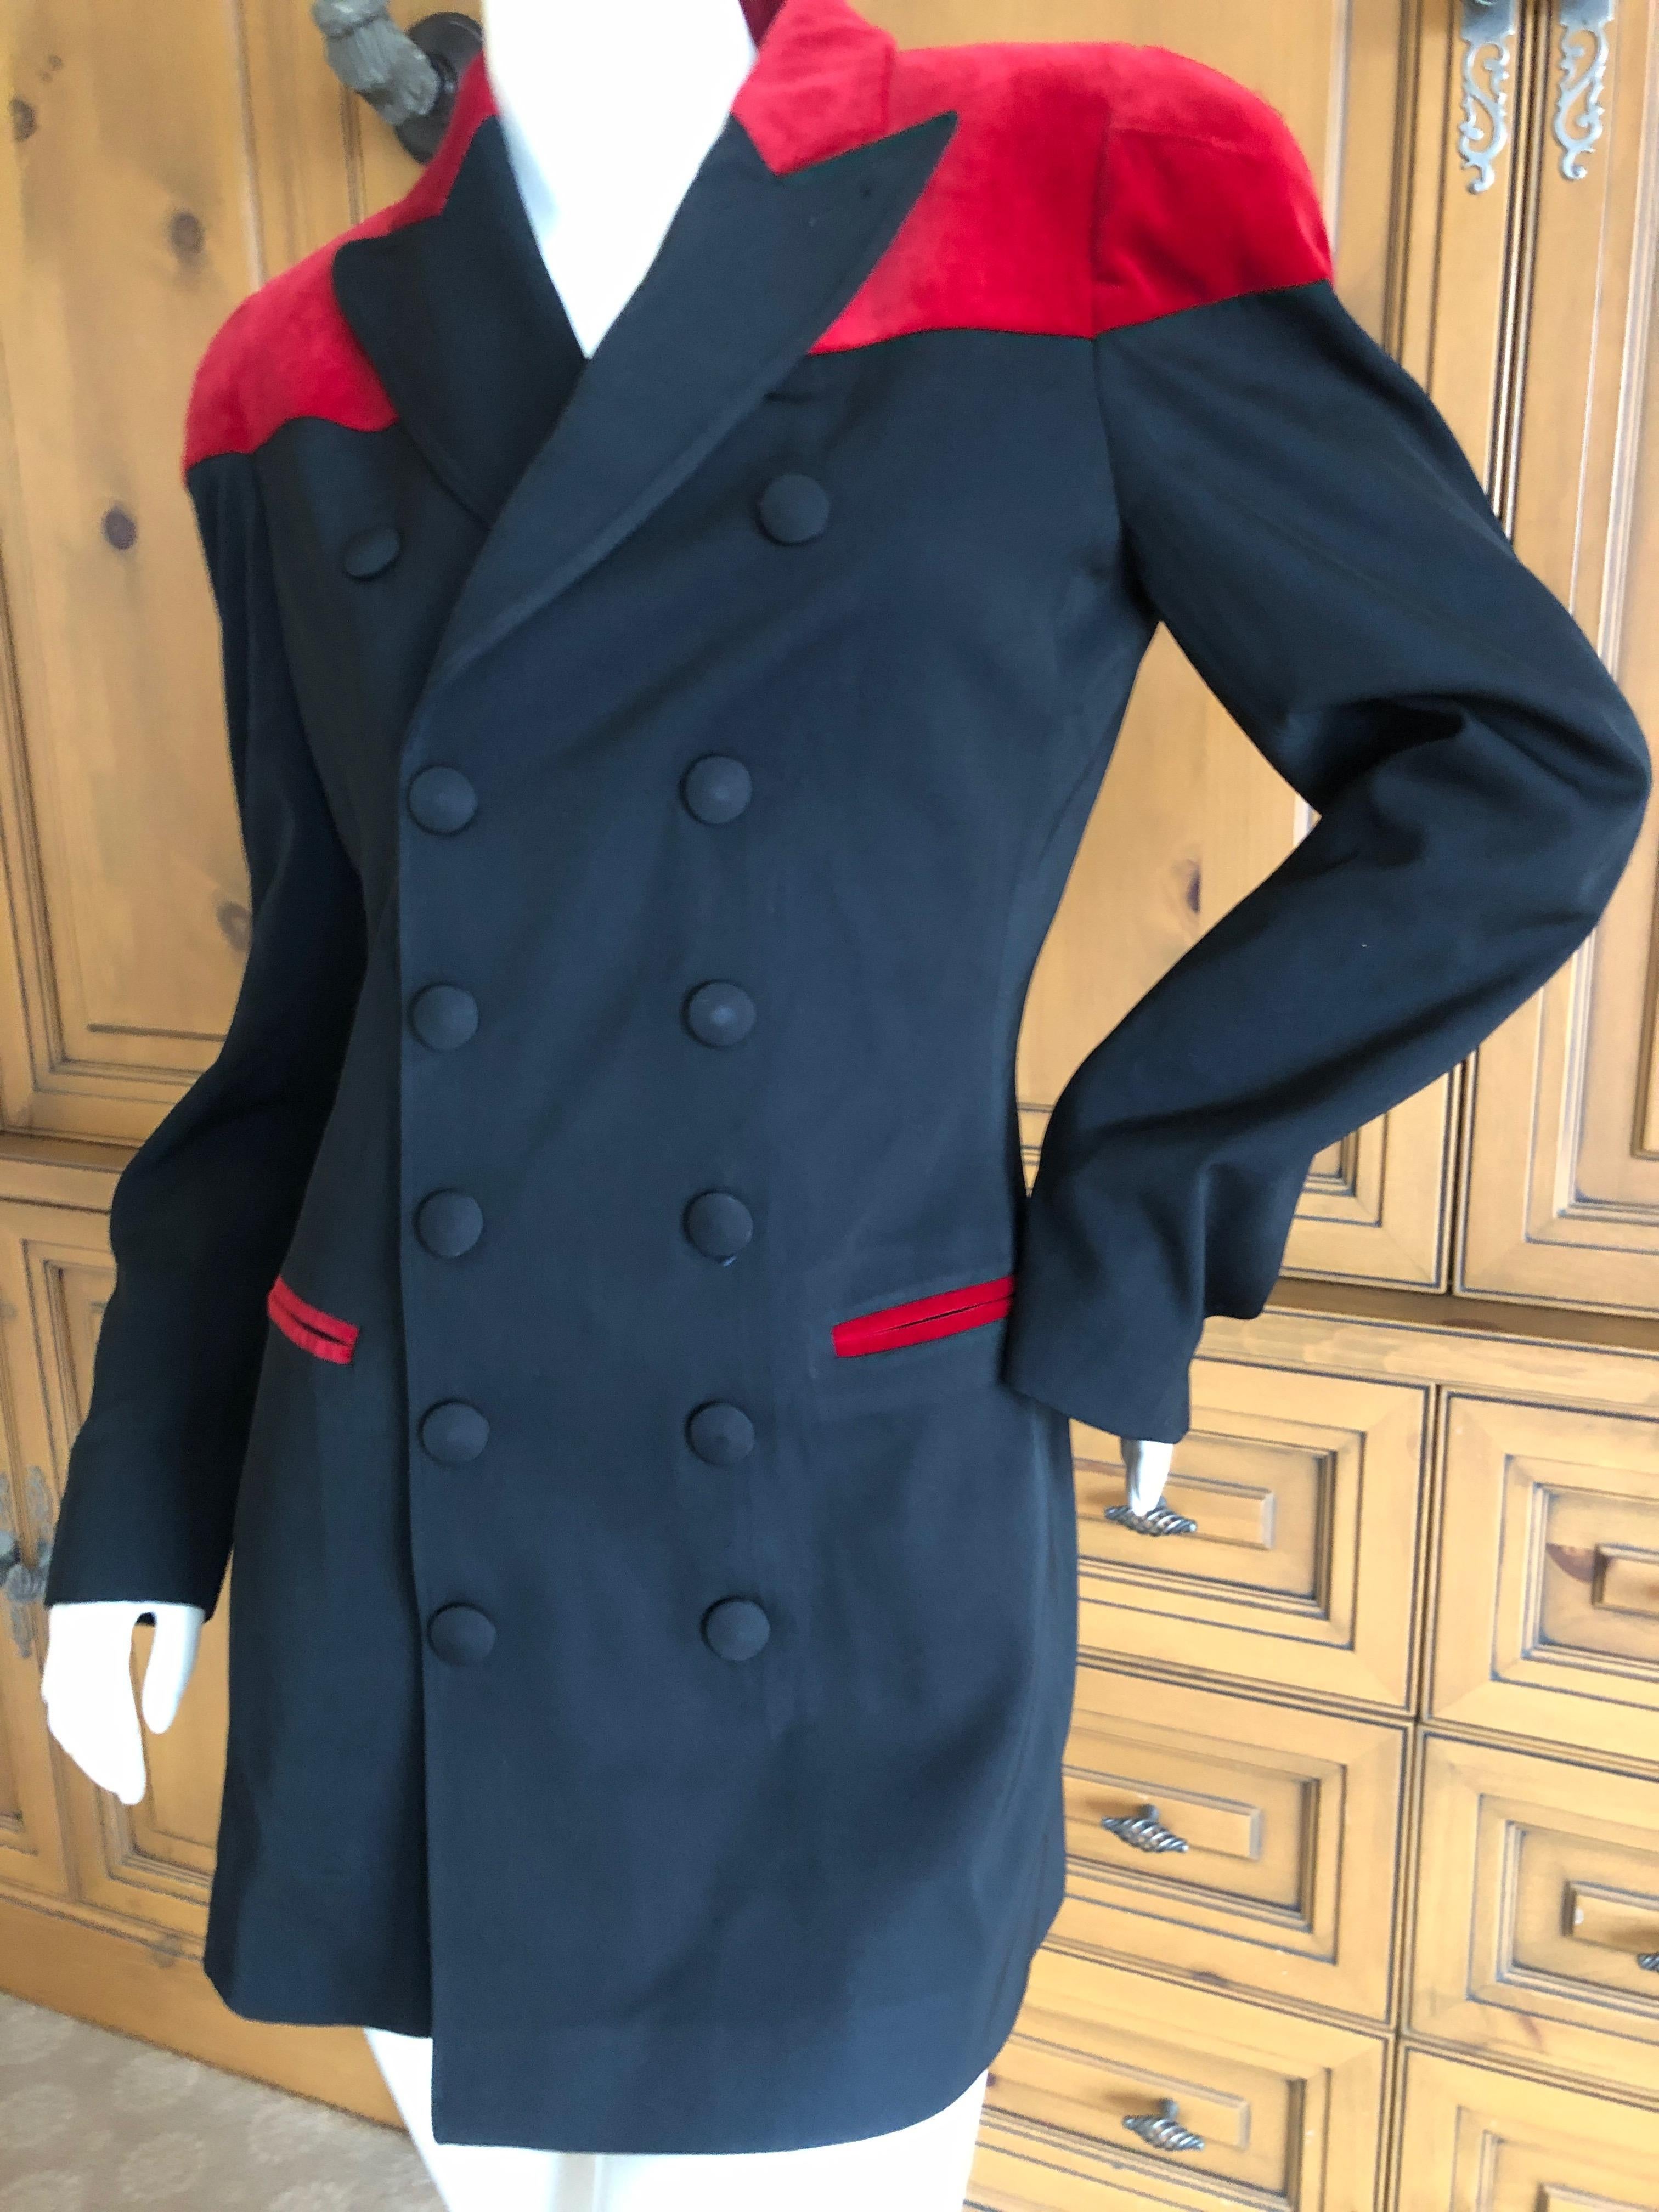 Jean Paul Gaultier Femme Vintage Velvet Trimmed Double Breasted Tuxedo Jacket In Excellent Condition For Sale In Cloverdale, CA